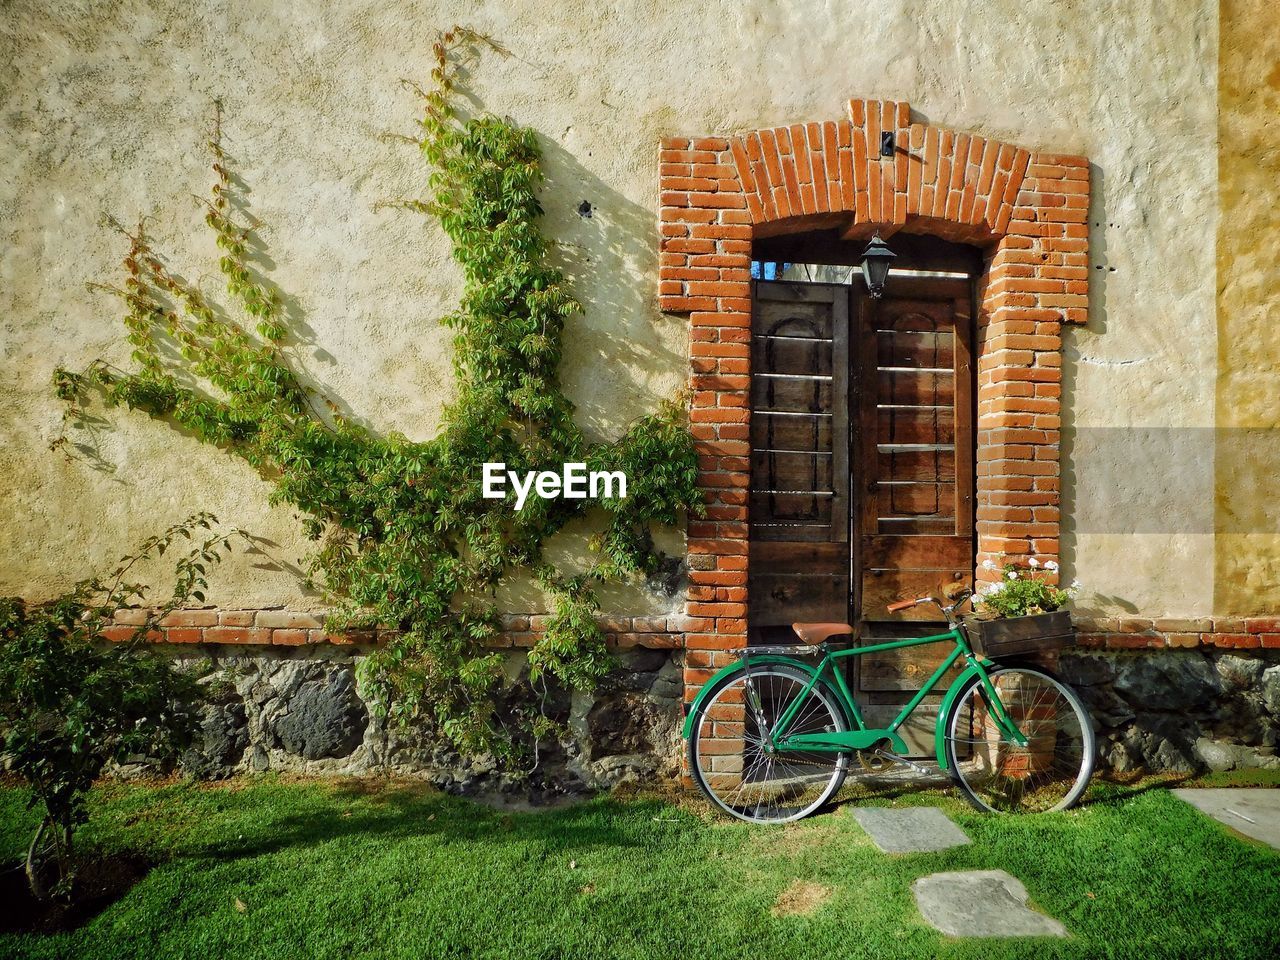 BICYCLE AGAINST BRICK WALL OF HOUSE